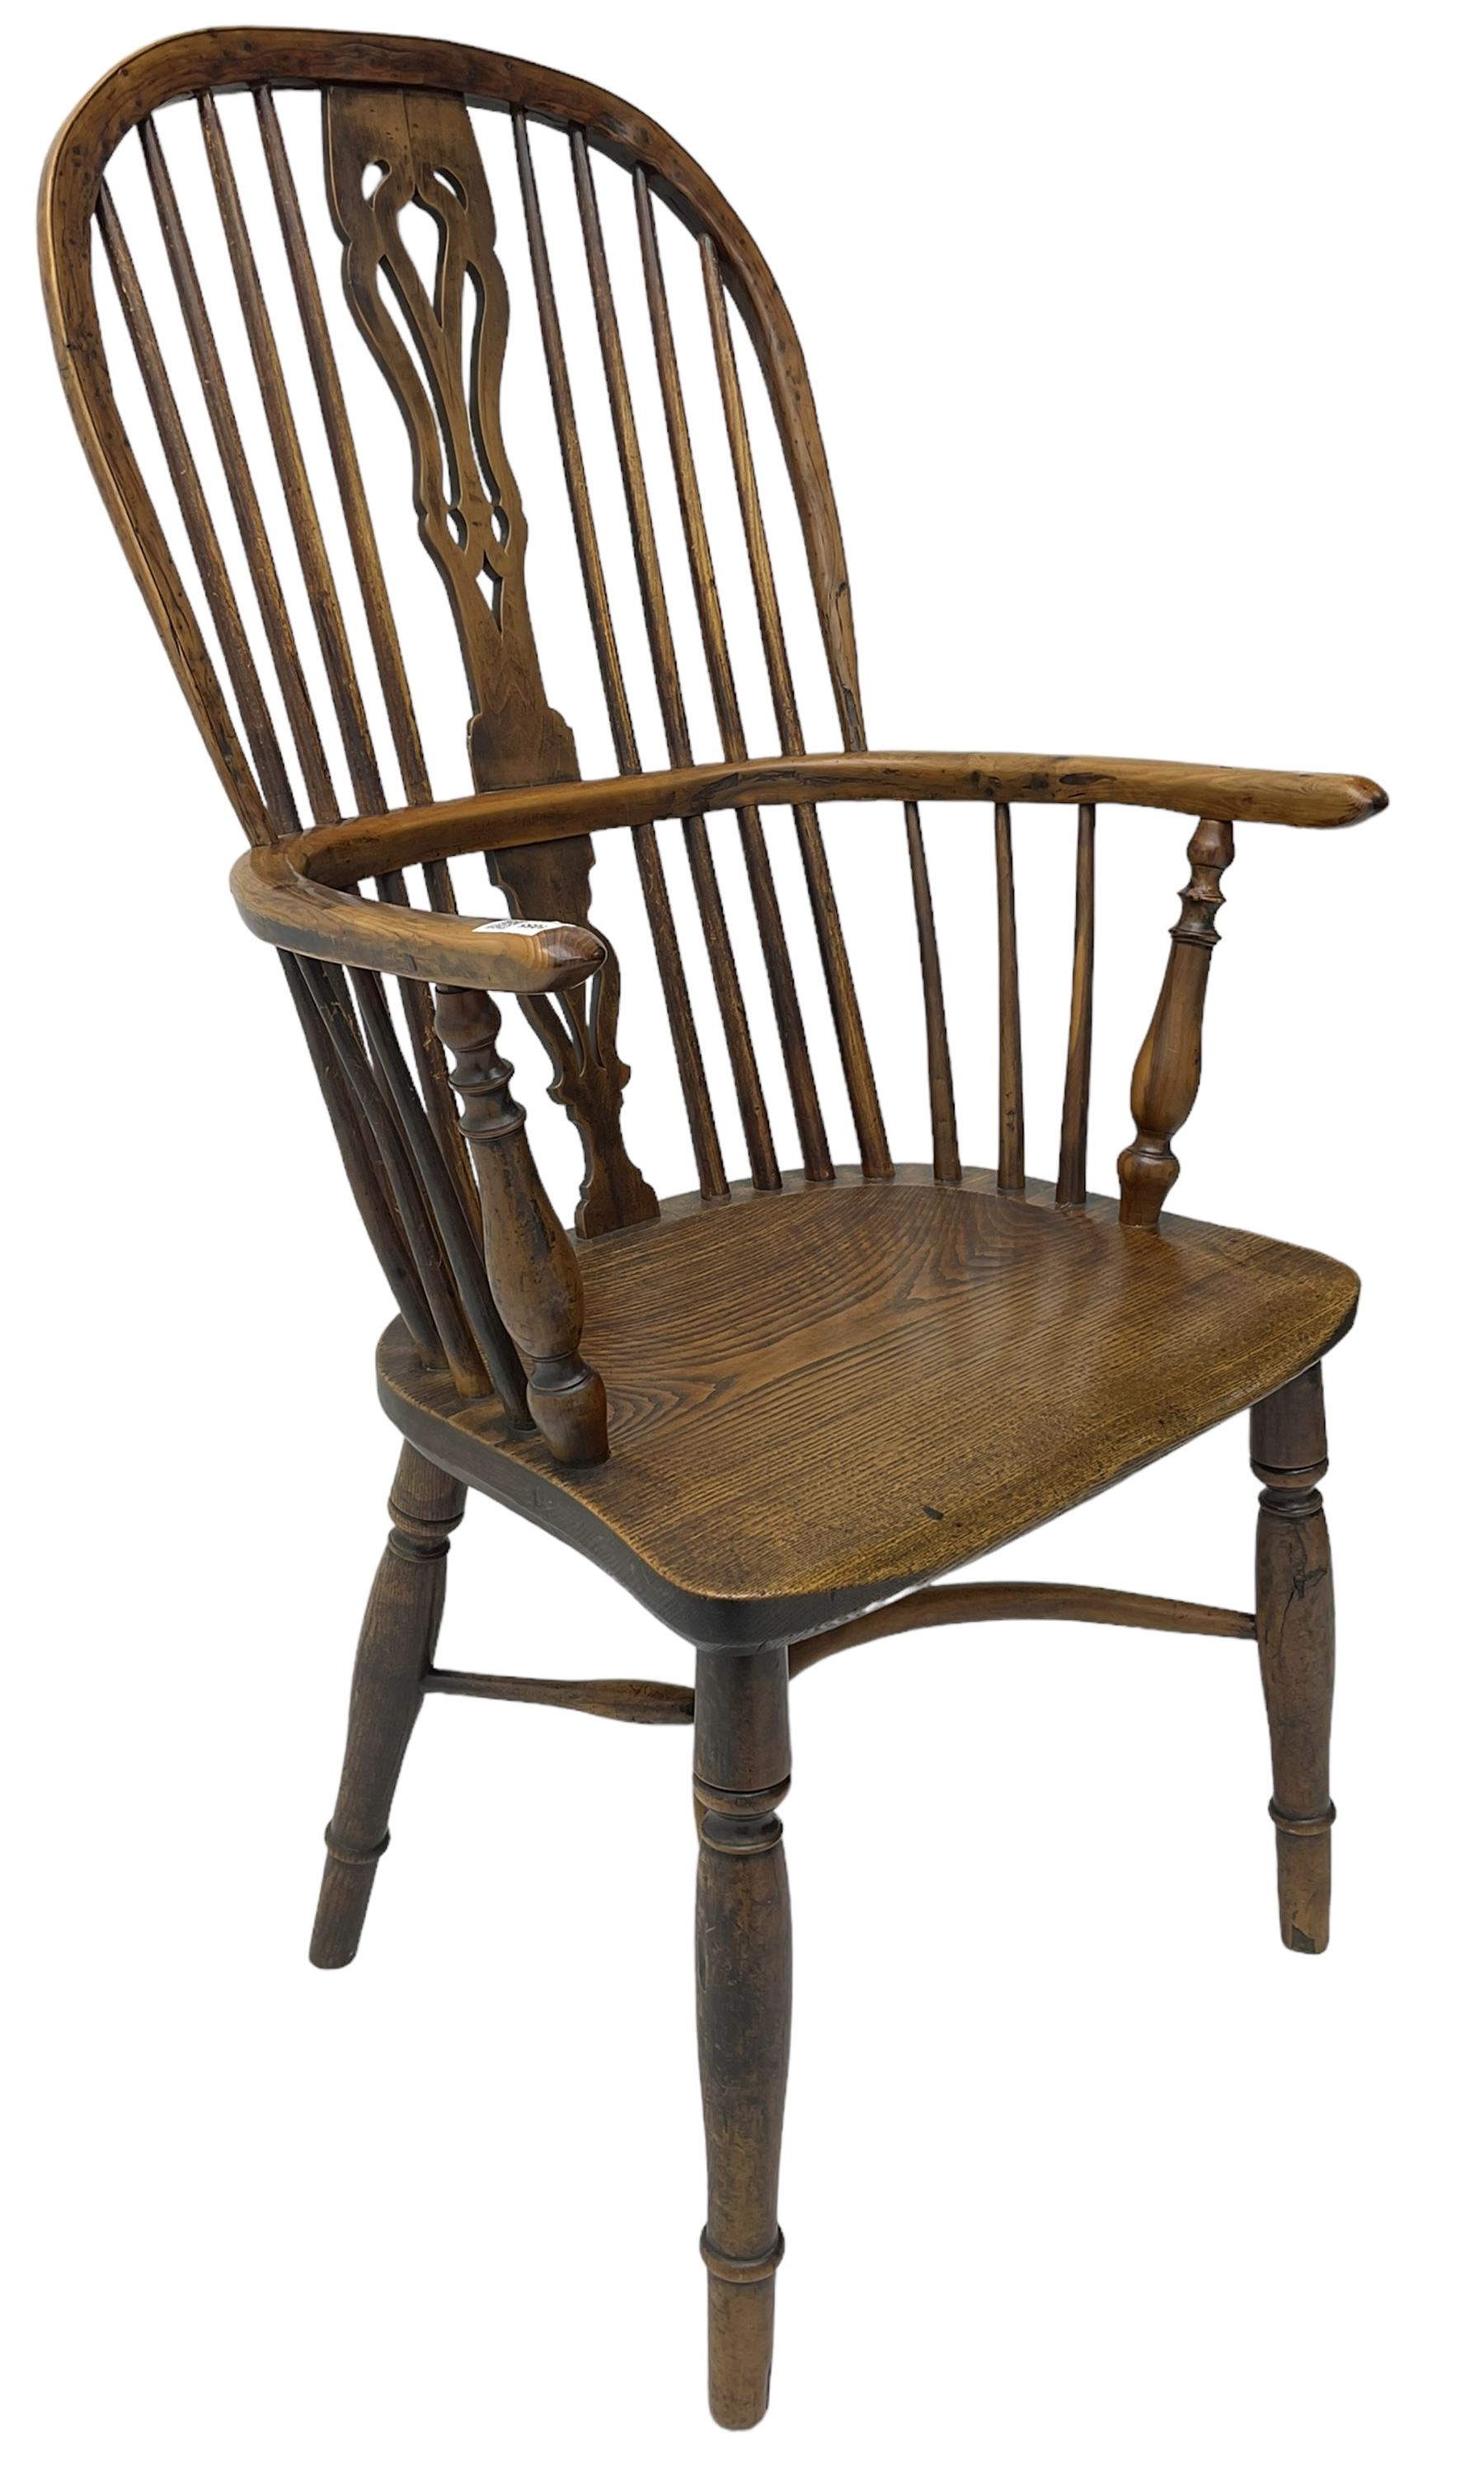 19th century yew wood and elm Windsor chair - Image 7 of 7